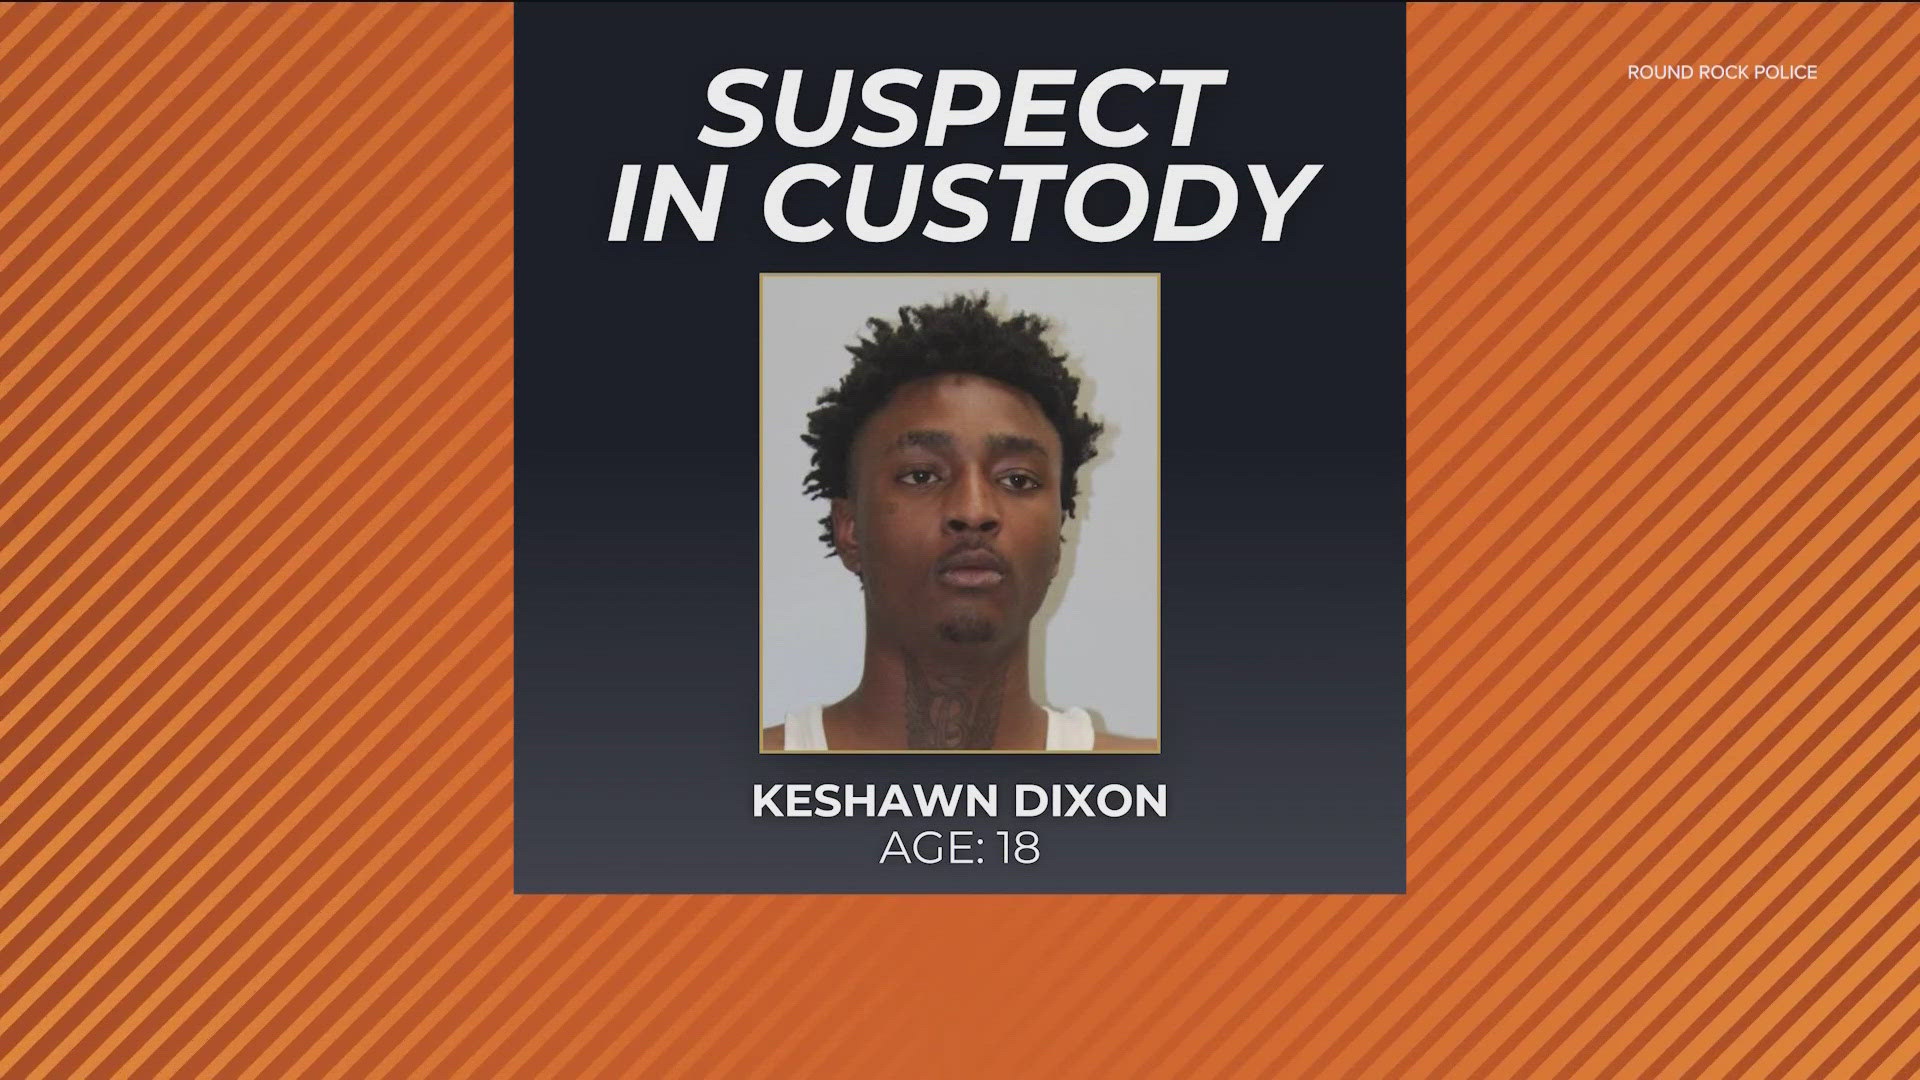 The Round Rock Police Department announced it has arrested a third person in connection with a deadly shooting at a Juneteenth festival.